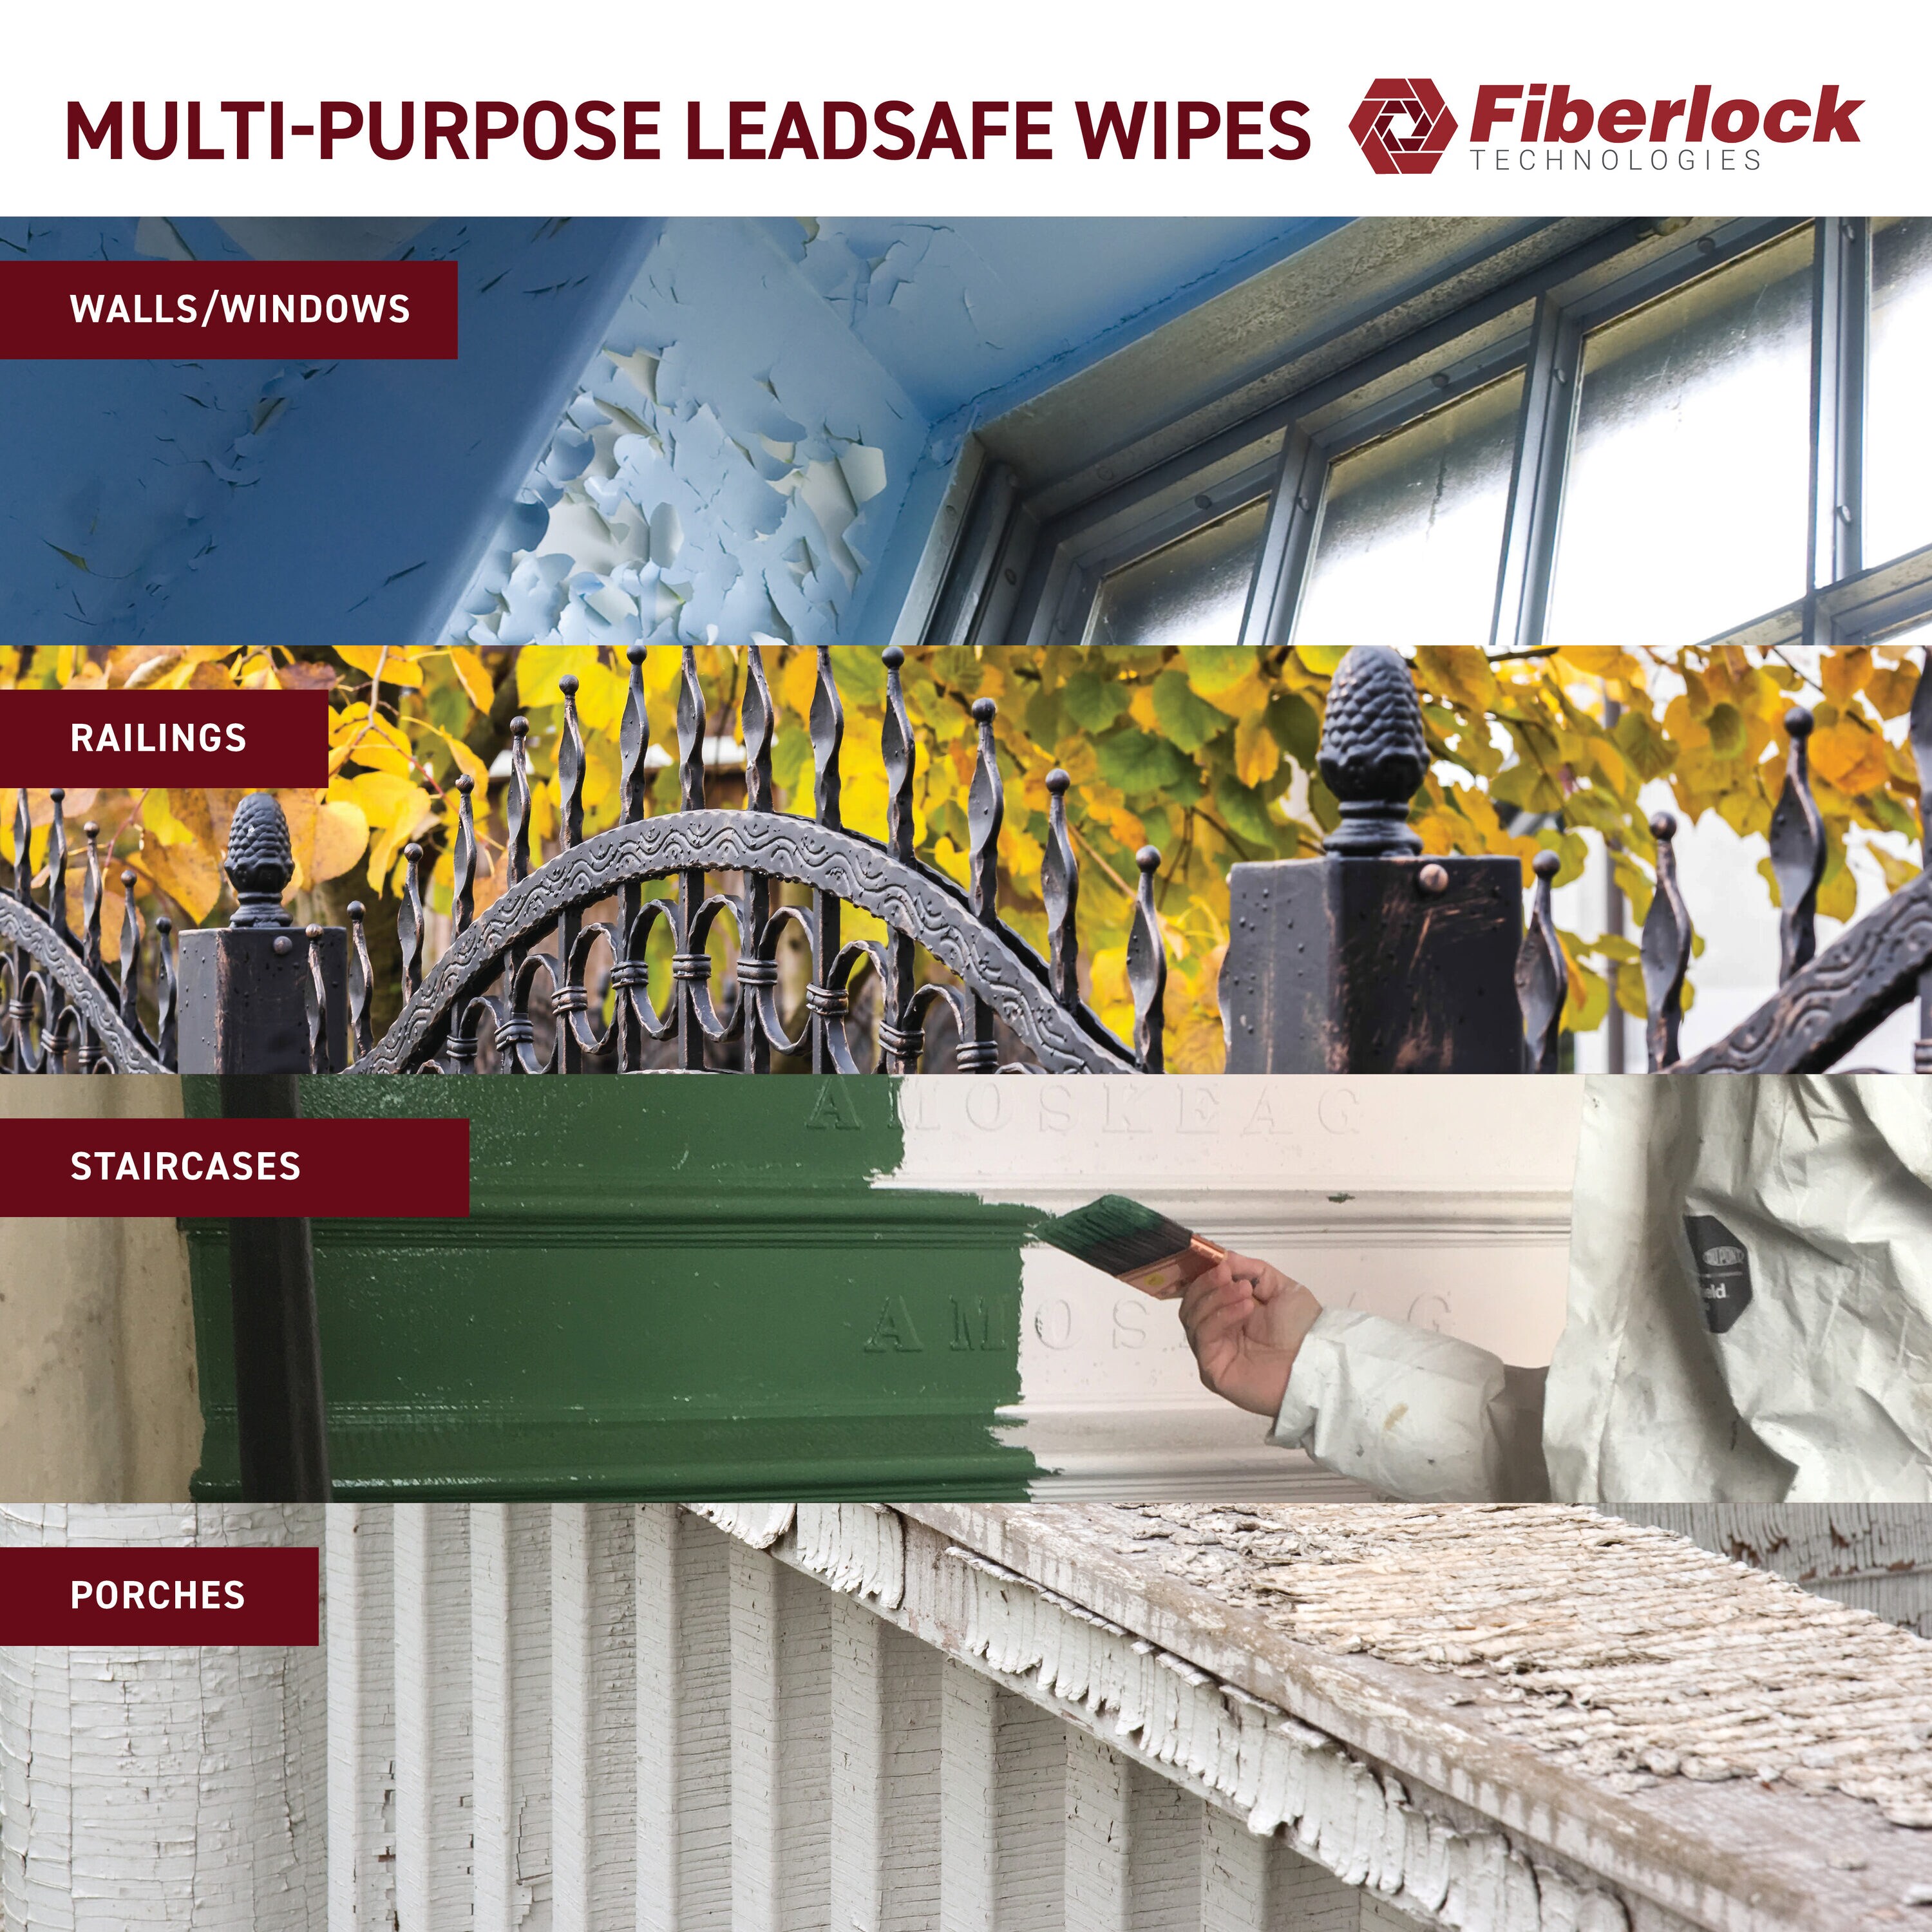 LeadSafe wipes are effective in the quick removal of harmful lead